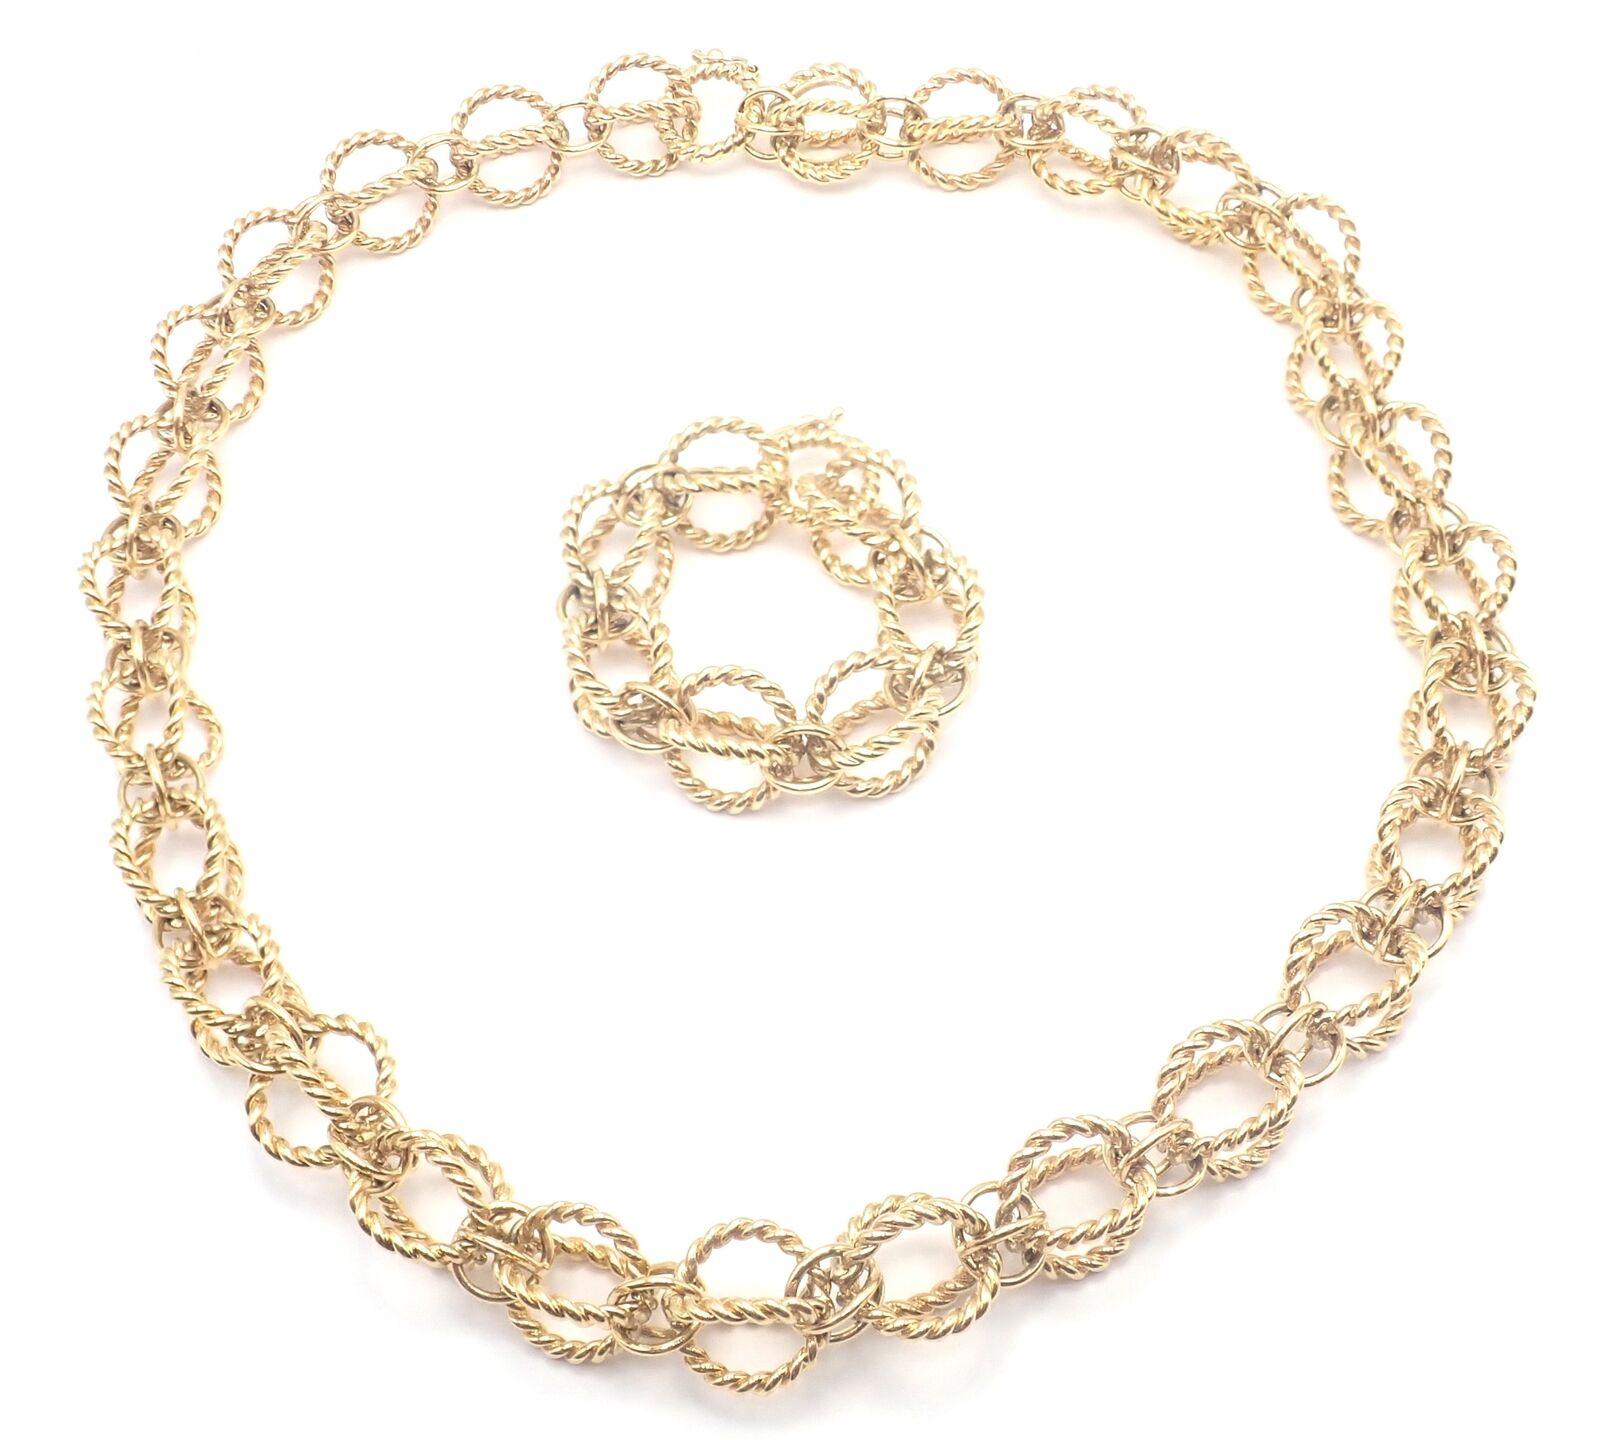 Tiffany & Co Jean Schlumberger Circle Rope Long Link Yellow Gold Necklace In Excellent Condition For Sale In Holland, PA